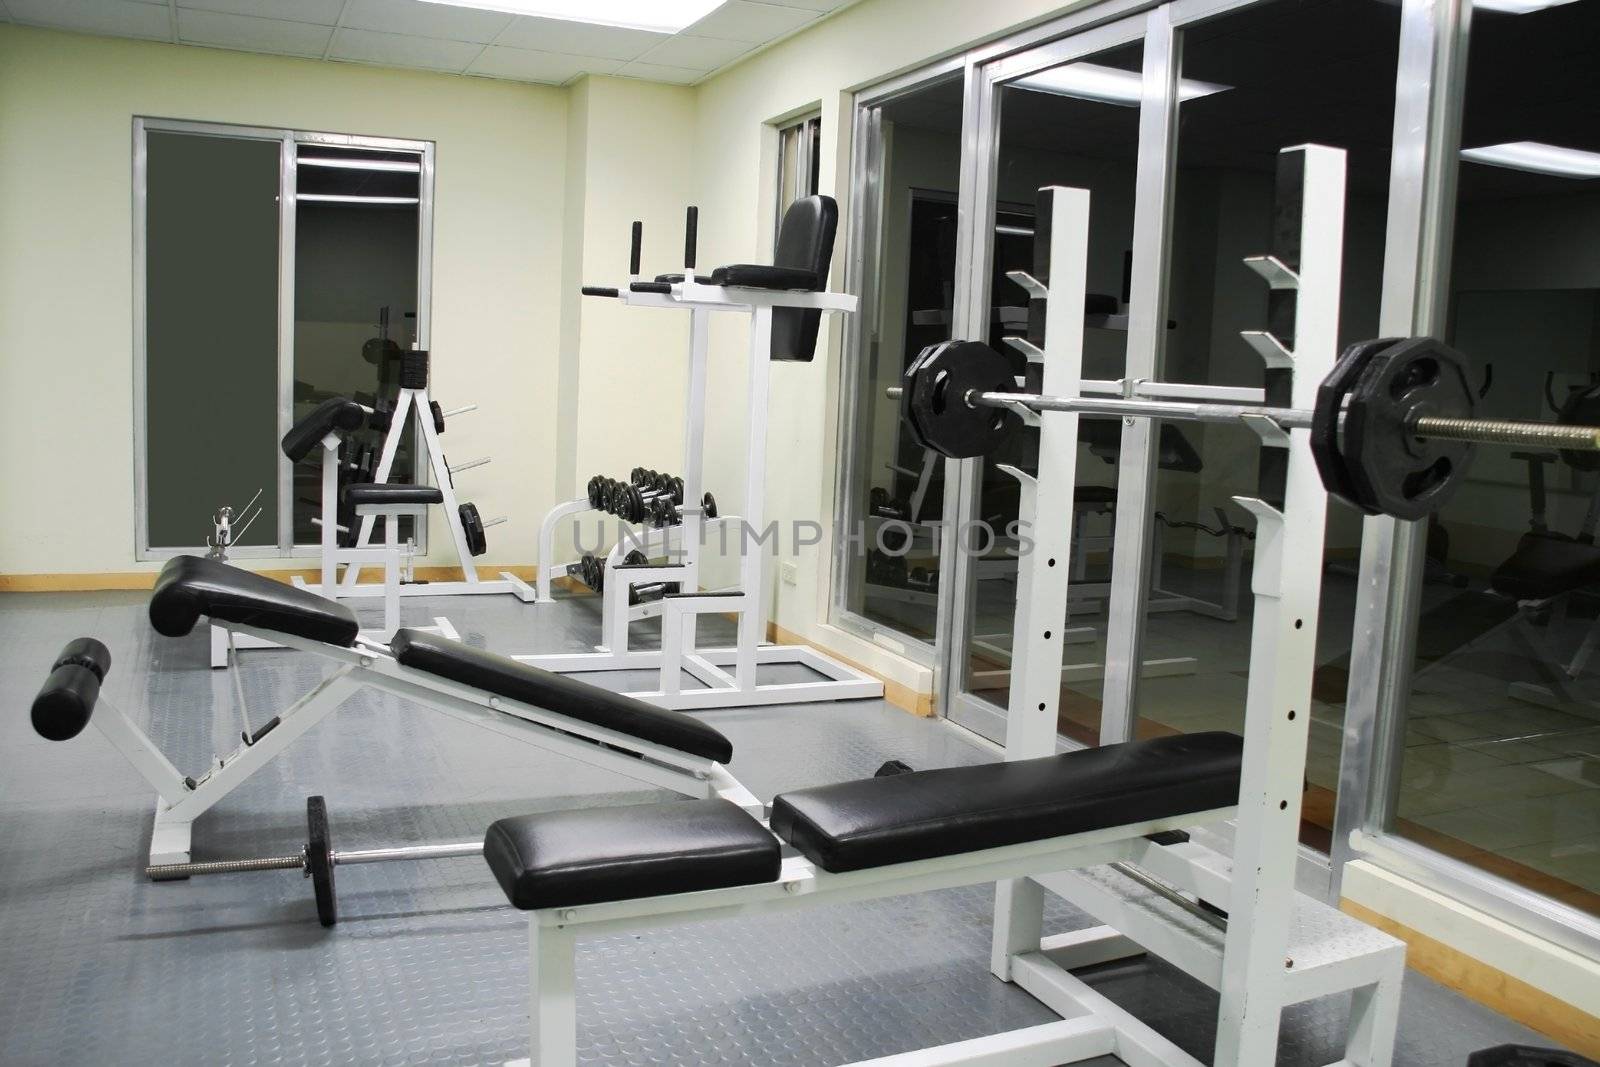 exercise gym with various benches dumb bells and bars
